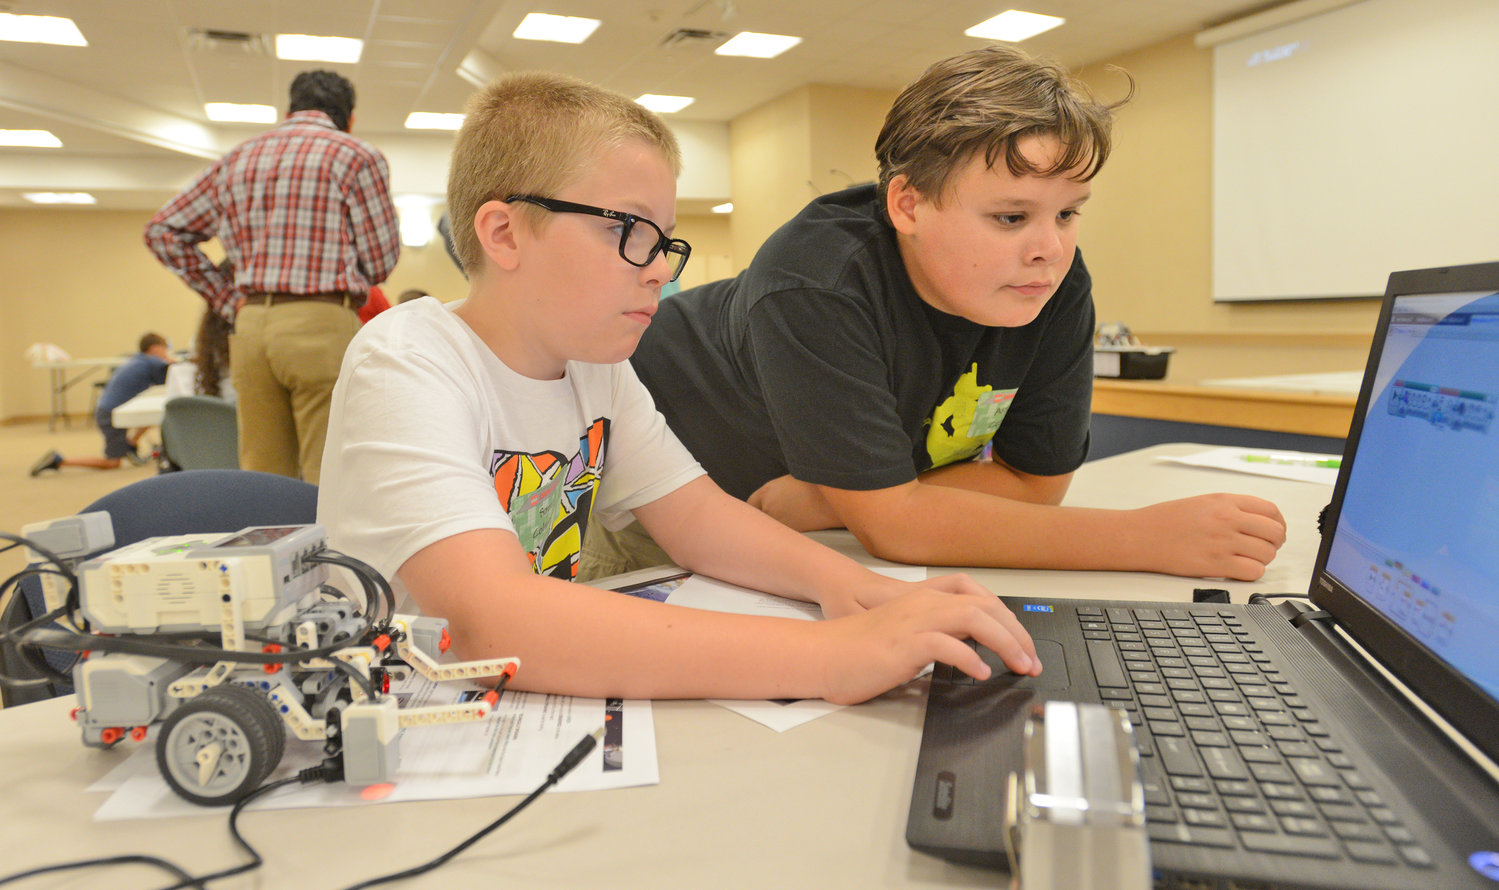 CHECKING THE PROGRAMMING — Denti Elementary School students Sam Colmey and Aidan Curry are at the keyboard to program their Lego robot for tasks to perform, during a STEM (science, technology, engineering, math) Outreach Program camp Wednesday at Griffiss Institute. The week-long Lego robotics camp, in conjunction with Rome Lab which is formally called the Air Force Research Laboratory Information Directorate, includes students in grades 5-8 who are learning how to build and program robots.